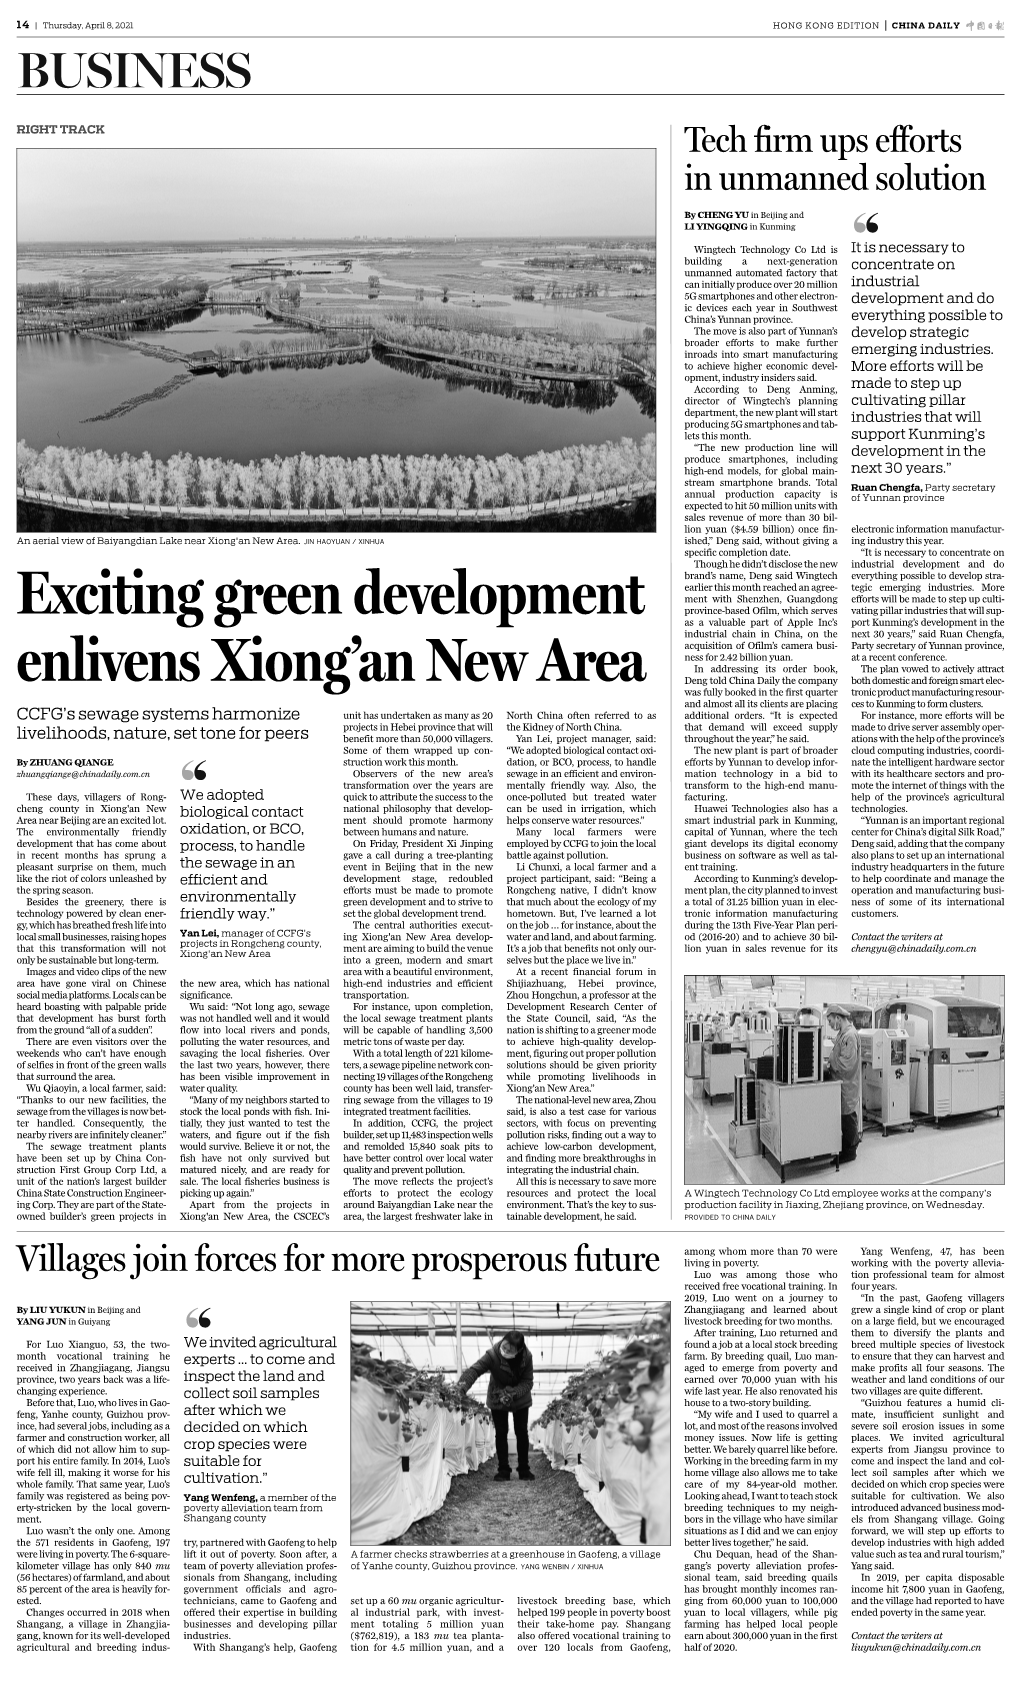 Exciting Green Development Enlivens Xiong'an New Area